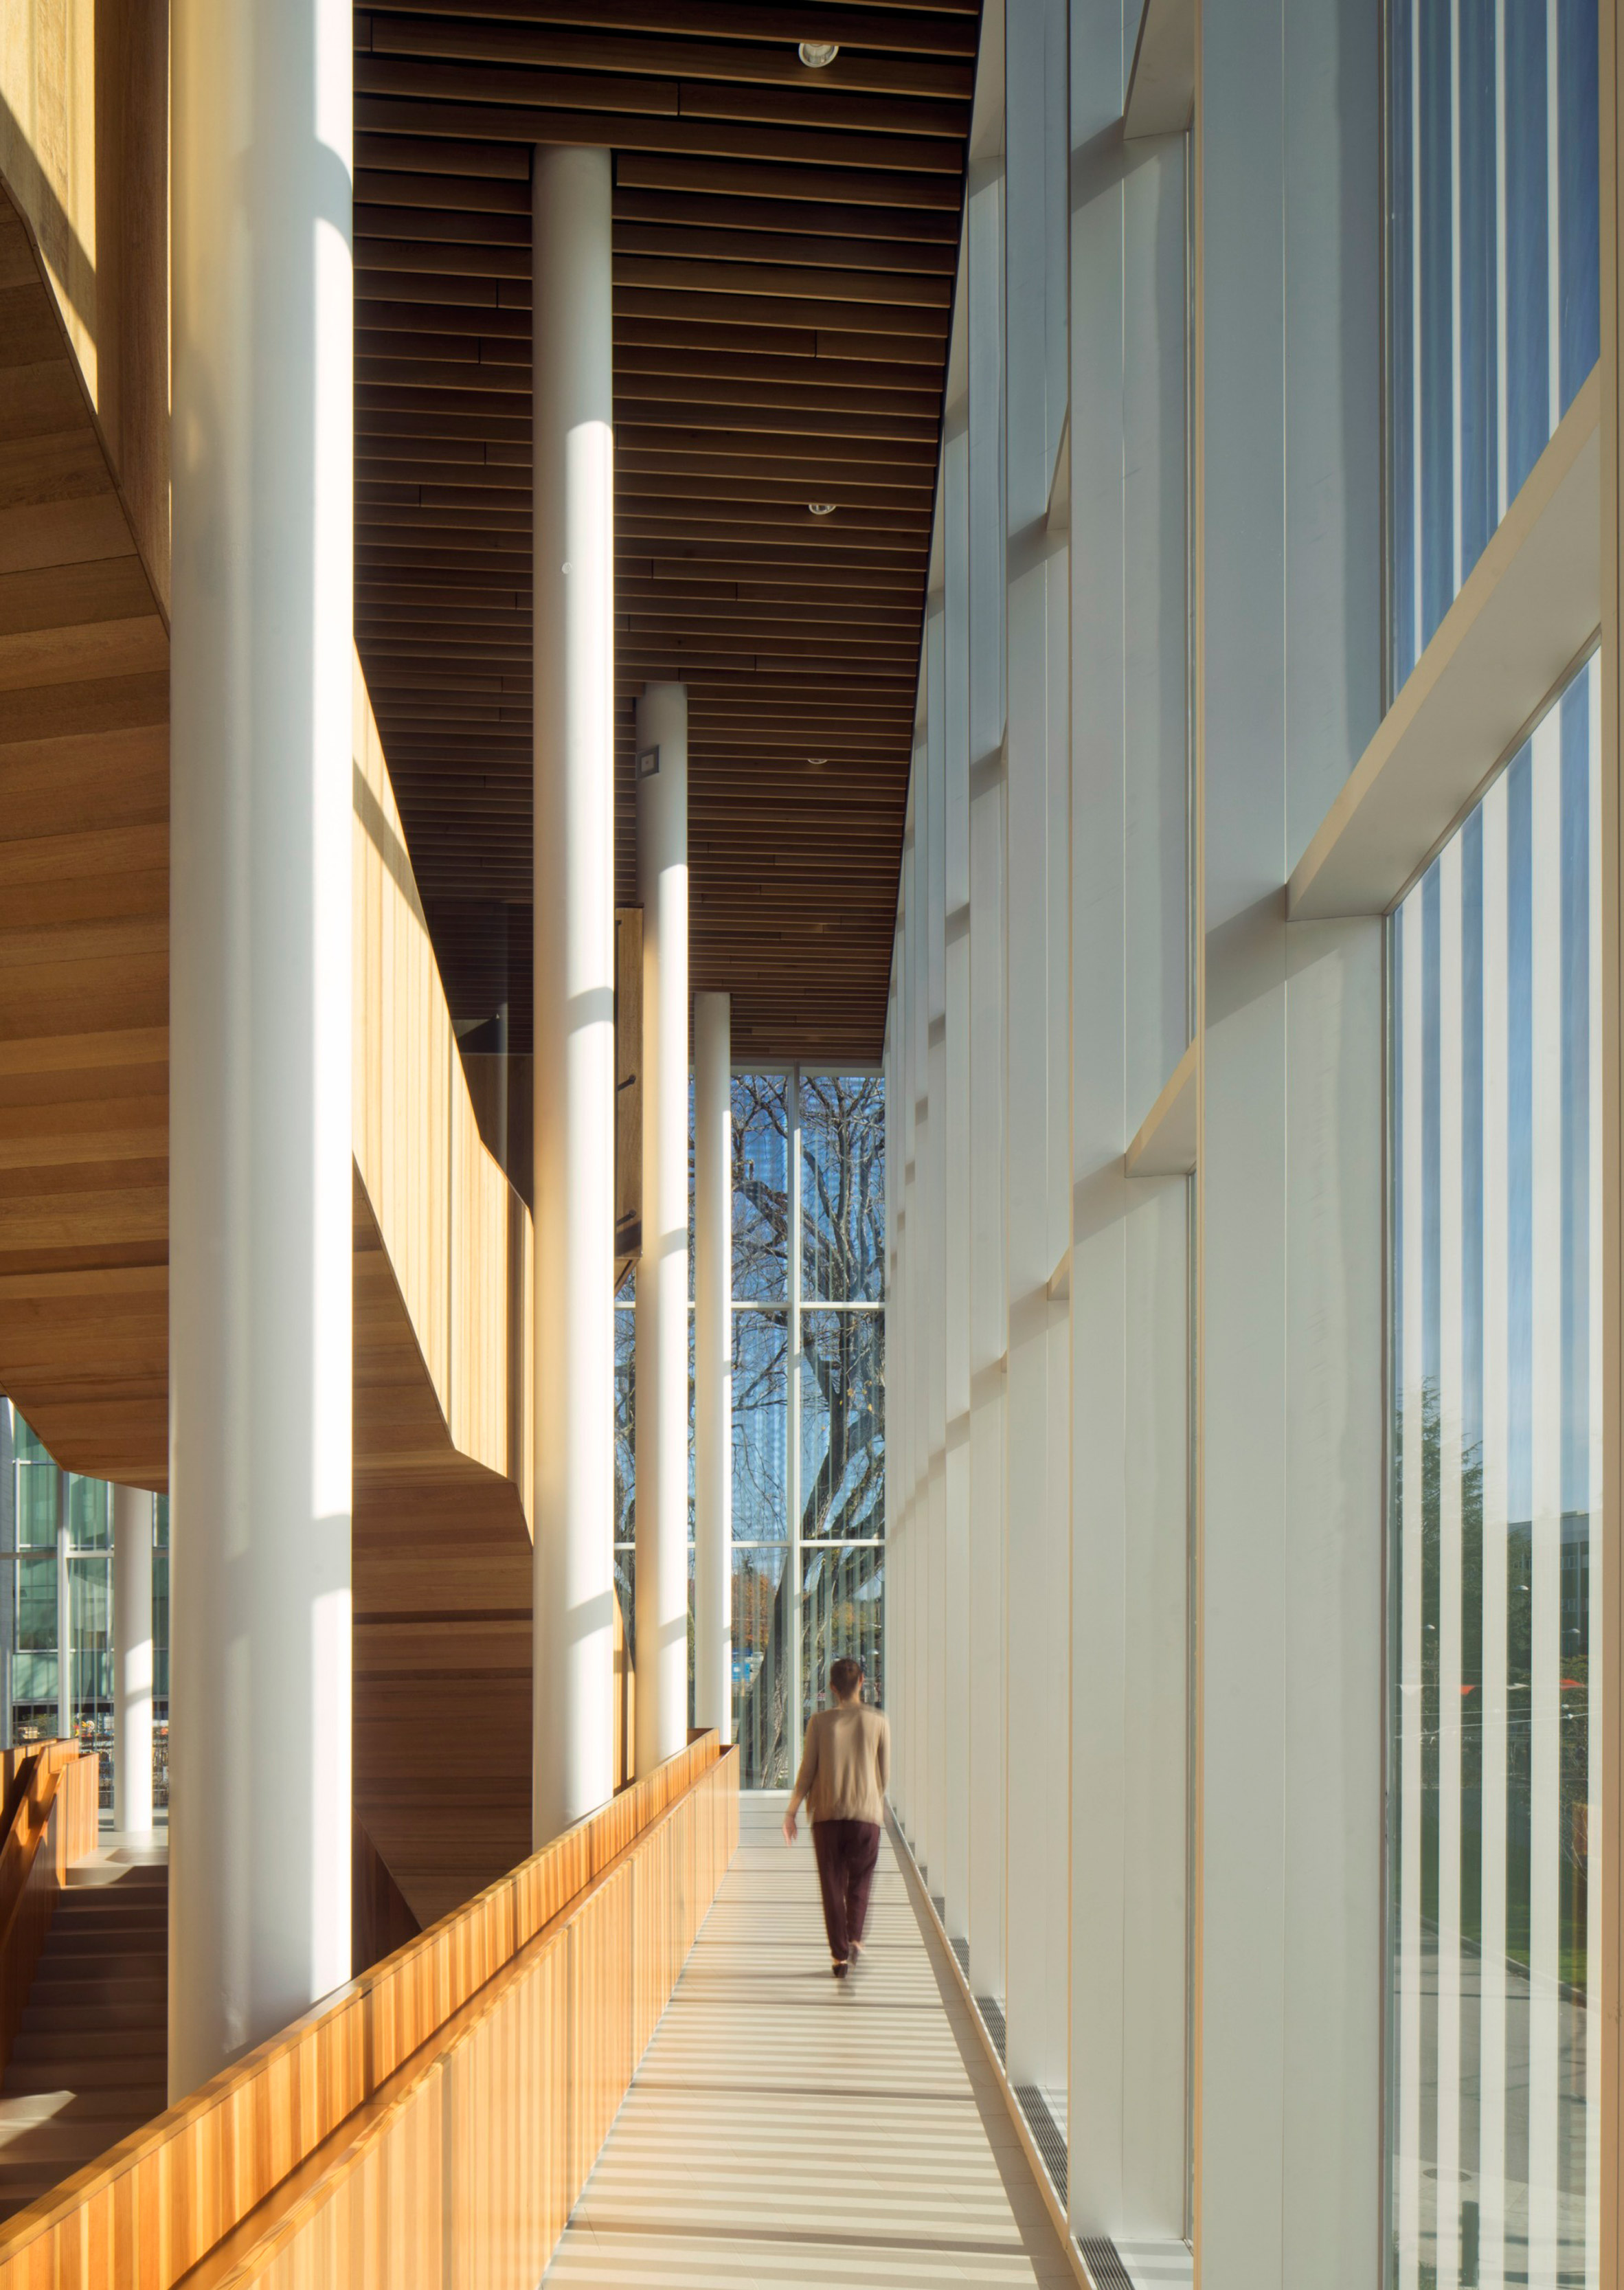 Vancouver university building by KPMB features fritted glass and rough-sawn cedar